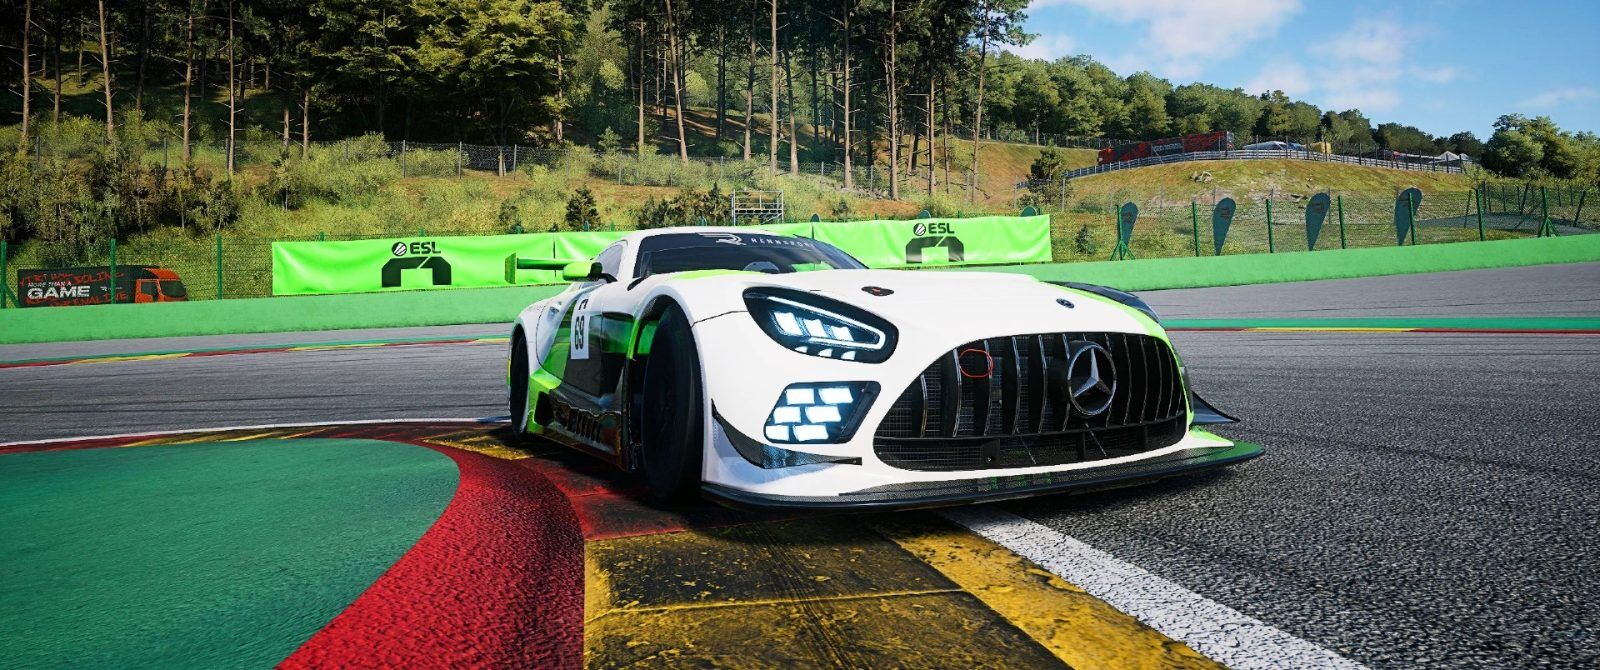 A Mercedes-AMG GT3 taking the first part of the Bus Stop chicane at Spa-Francorchamps with an ESL R1 logo behind.